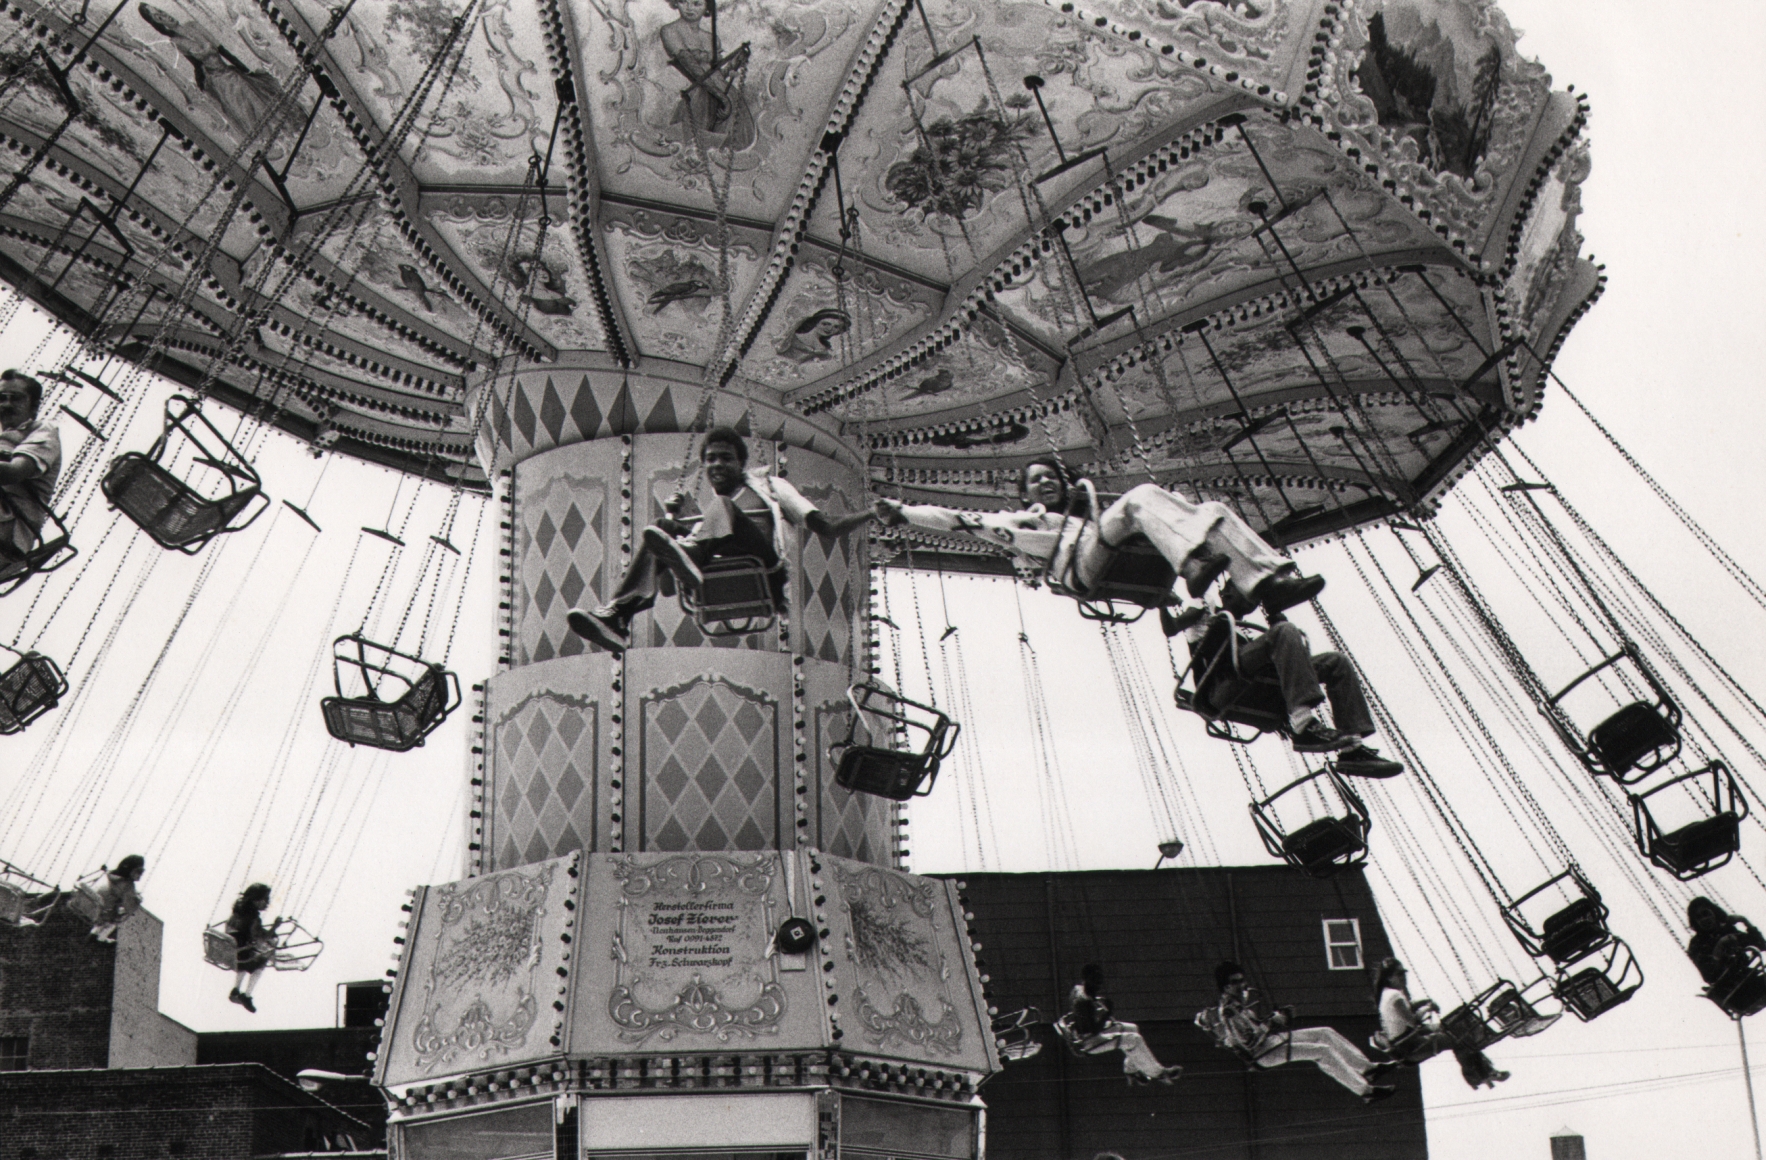 18. Anthony Barboza, Coney Island, ​1970s. A carnival swing in motion, photographed from below. The two closest riders hold hands.